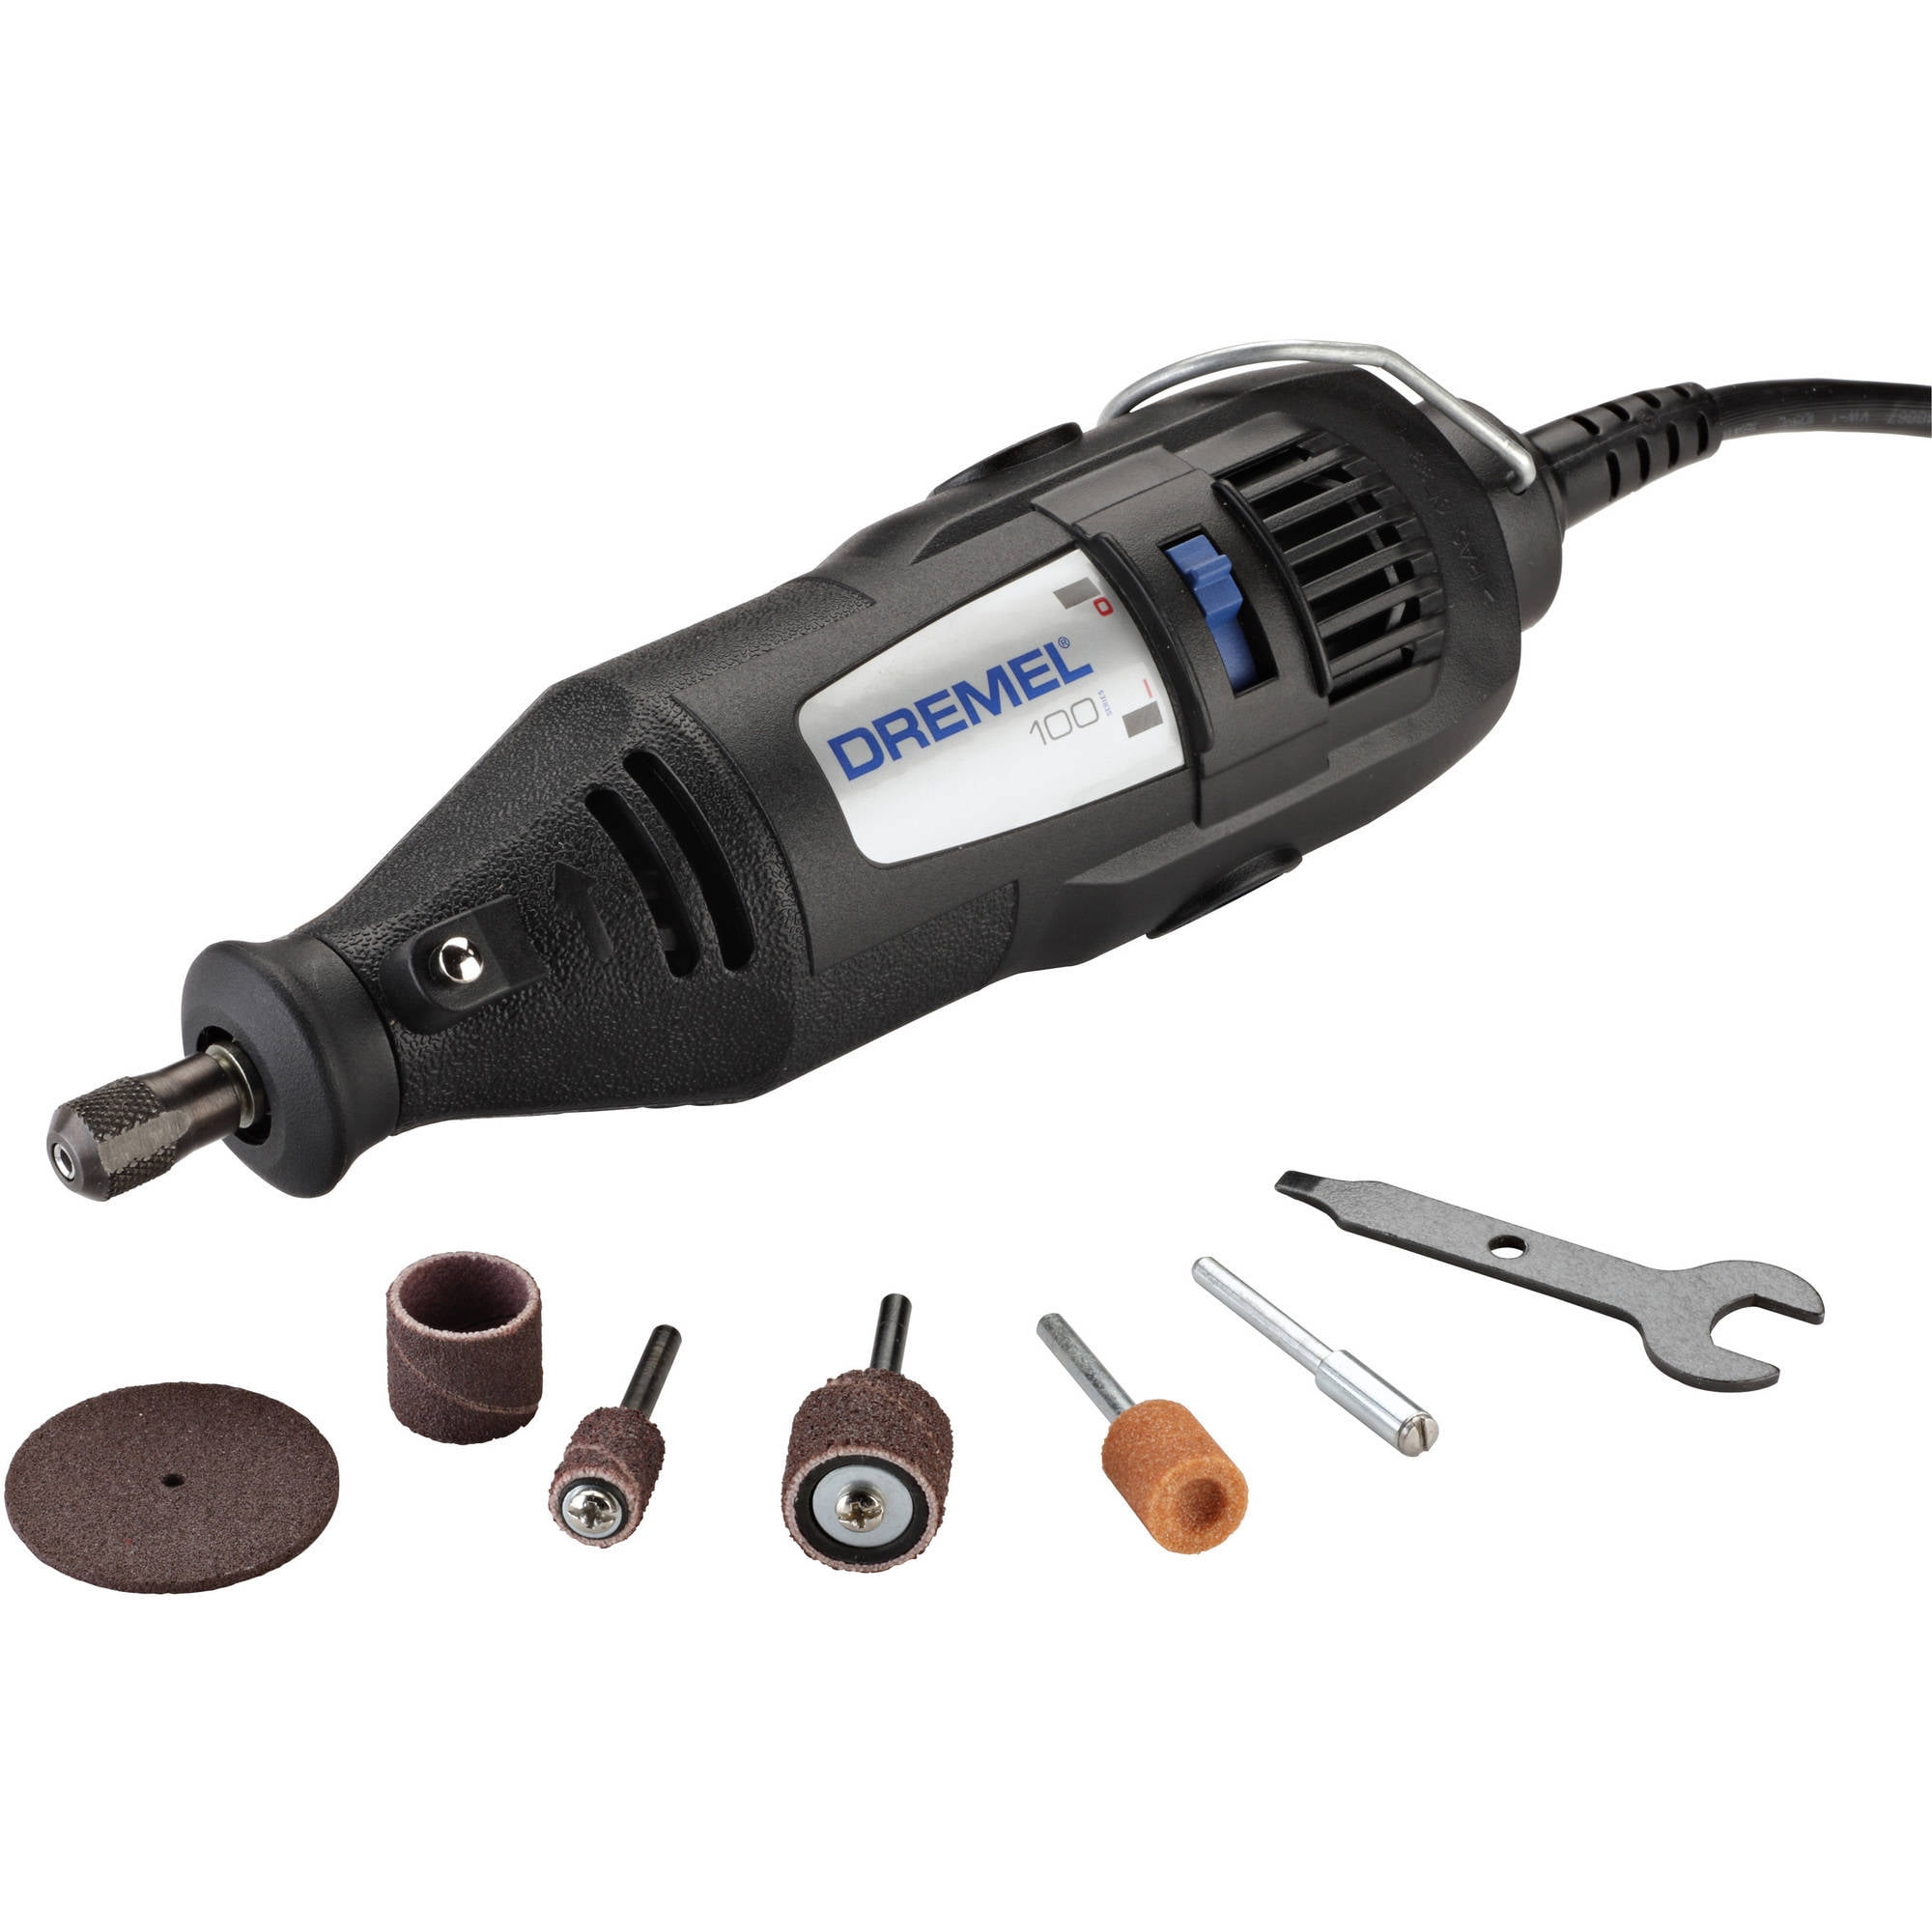 DREMEL STYLO + 10 Accessorized Advantageous Kit grinding machine hobby tool  glass, wood, leather, stone and metal in materials such as use - AliExpress